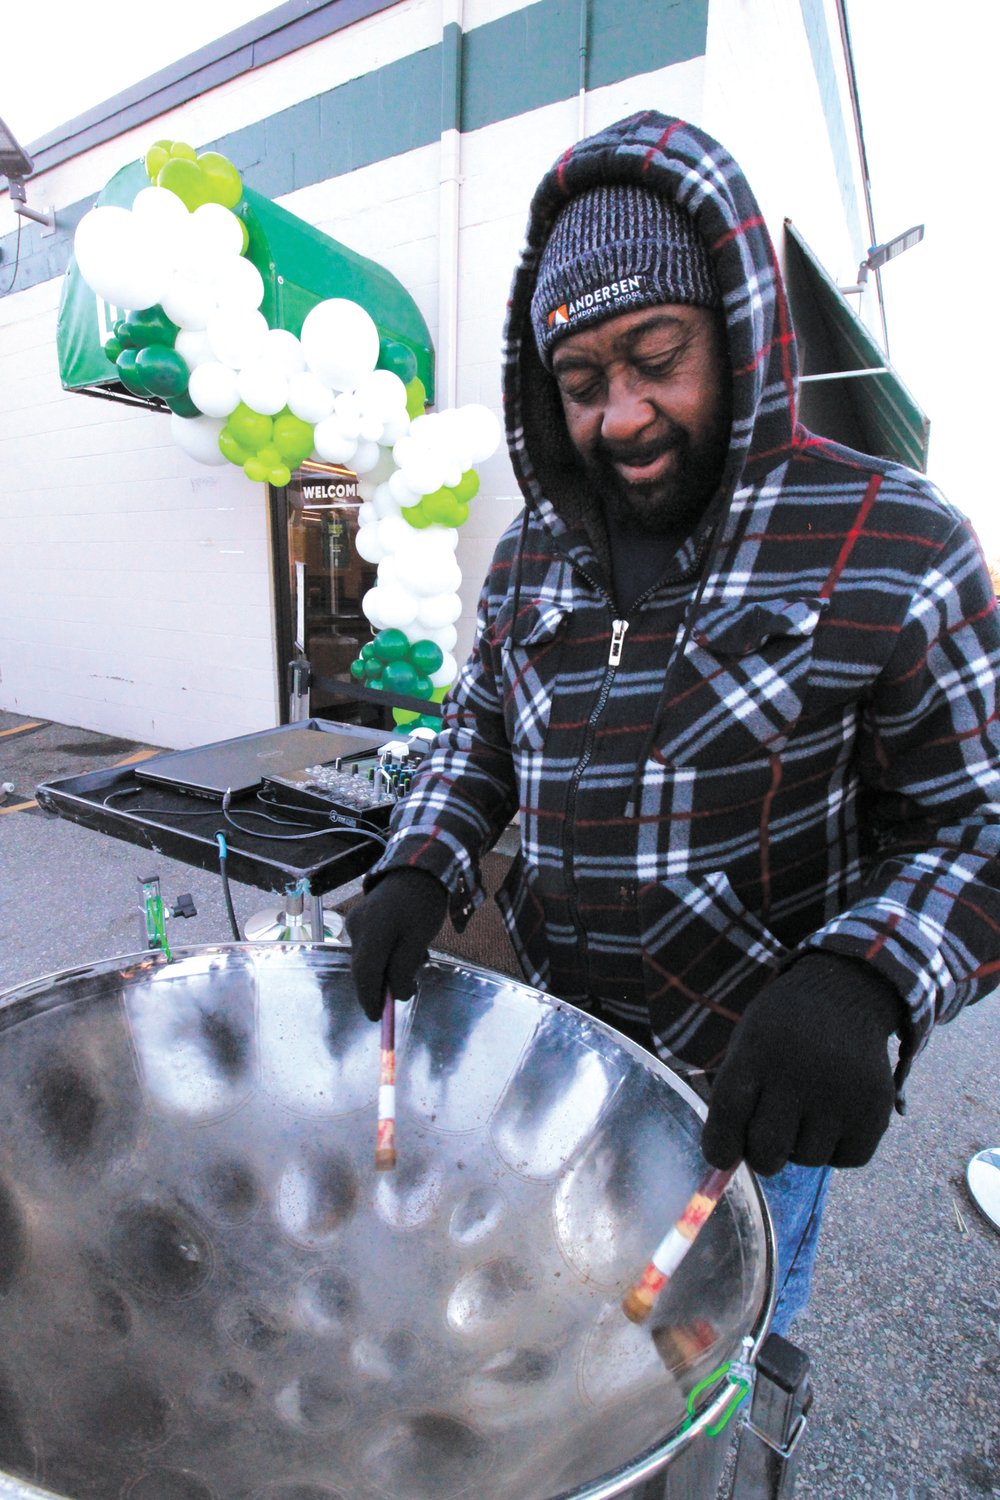 DRUMMING UP BUSINESS: Bernell Henry of the Caribbean Vibe Steel Band entertained customers on the opening day of recreational marijuana sales at the RISE shop, formerly the Summit Compassion Center, on Jefferson Boulevard in Warwick.